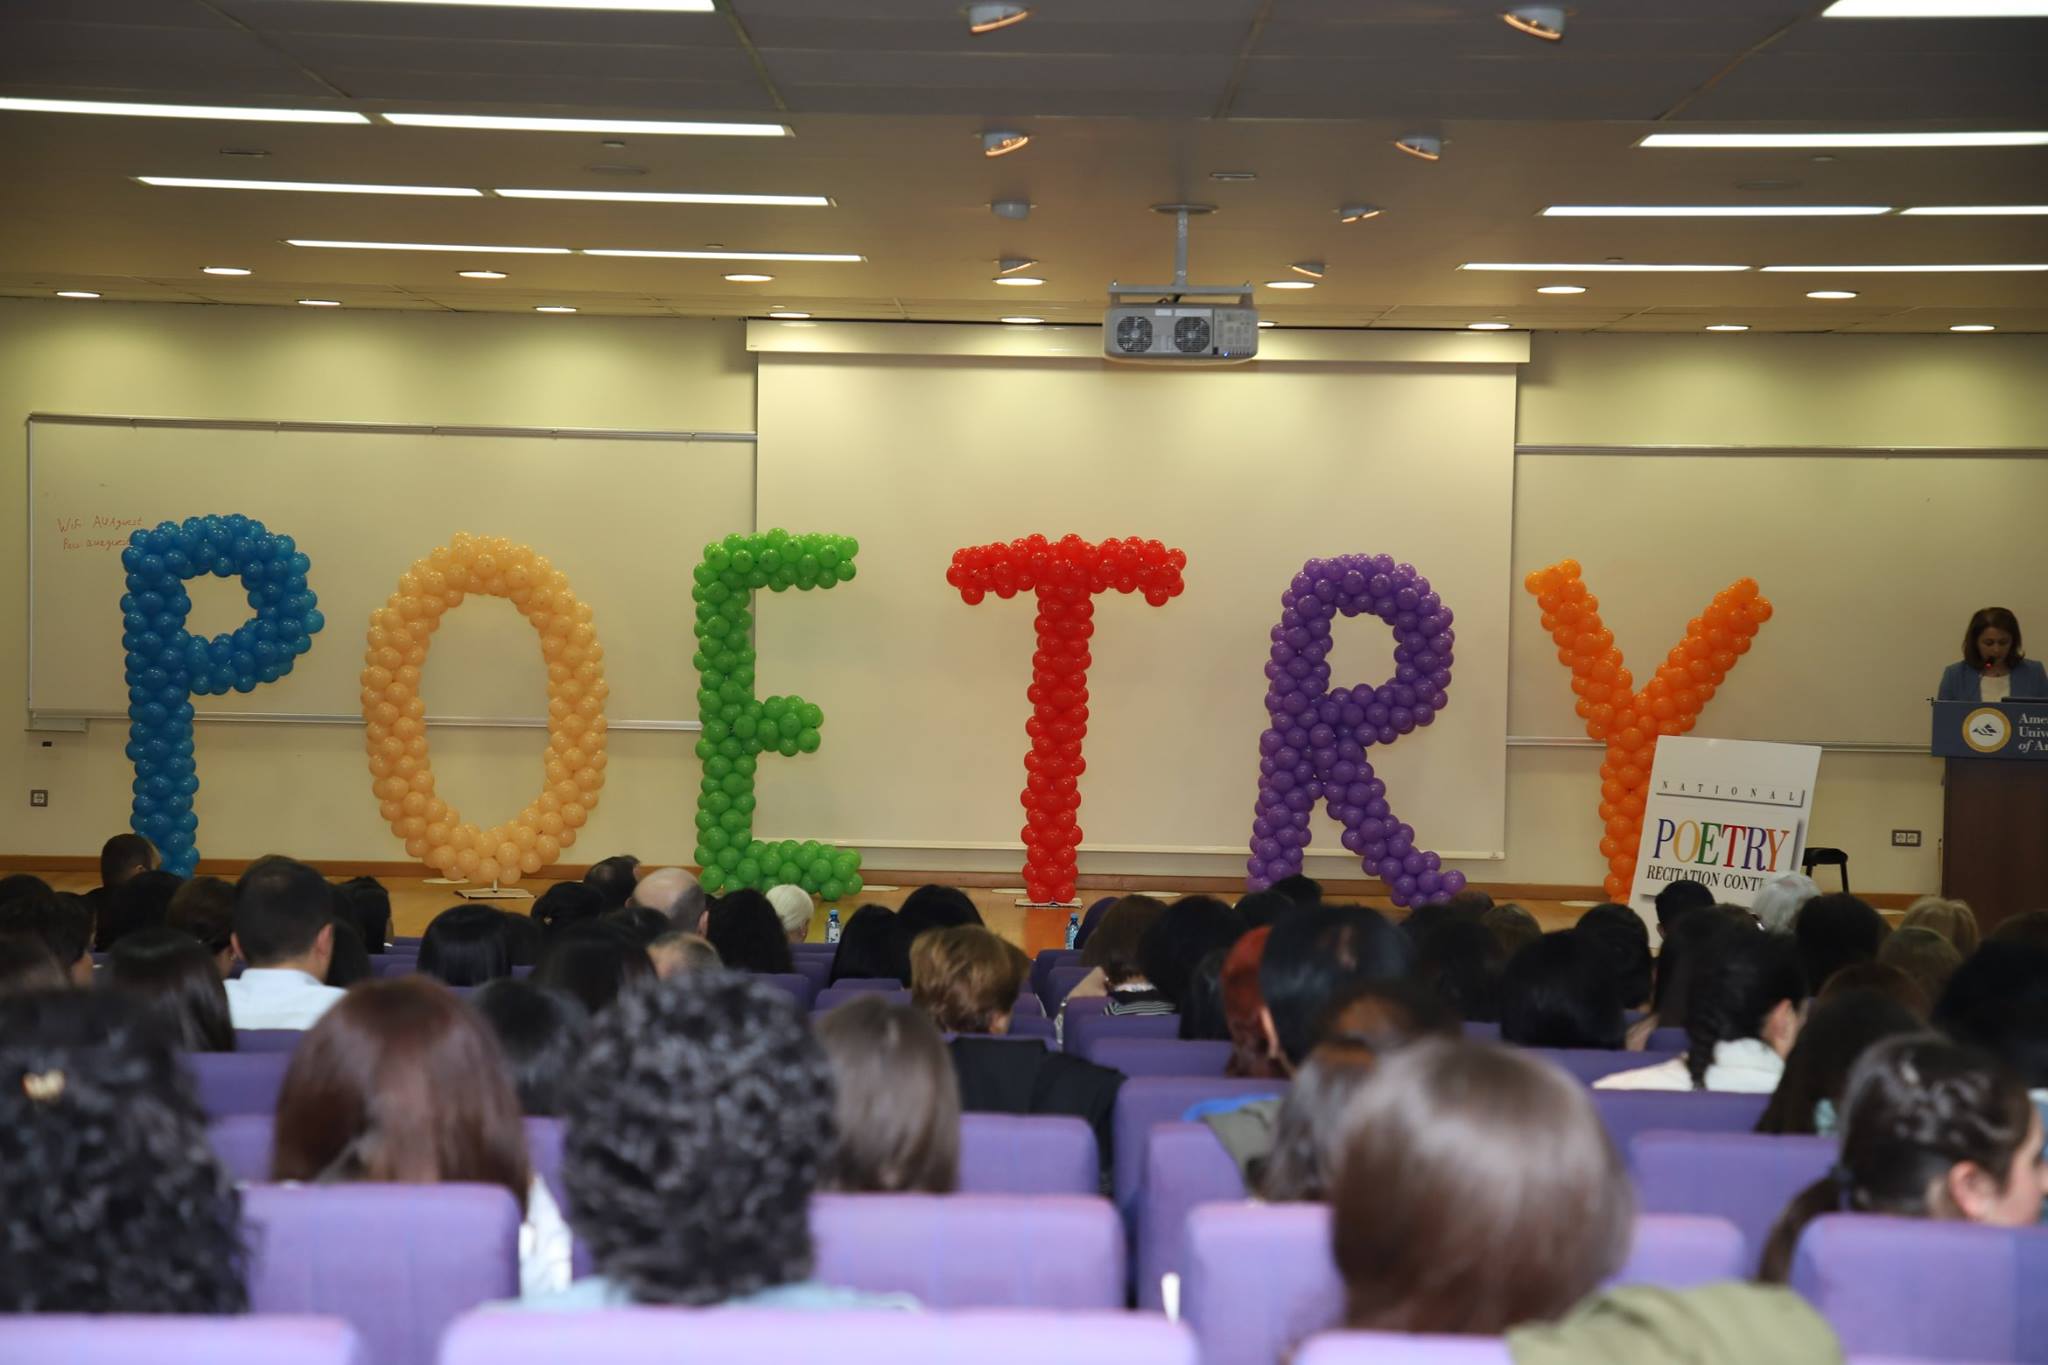 Manoogian Hall at AUA hosts events like the National Poetry Recitation Contest.